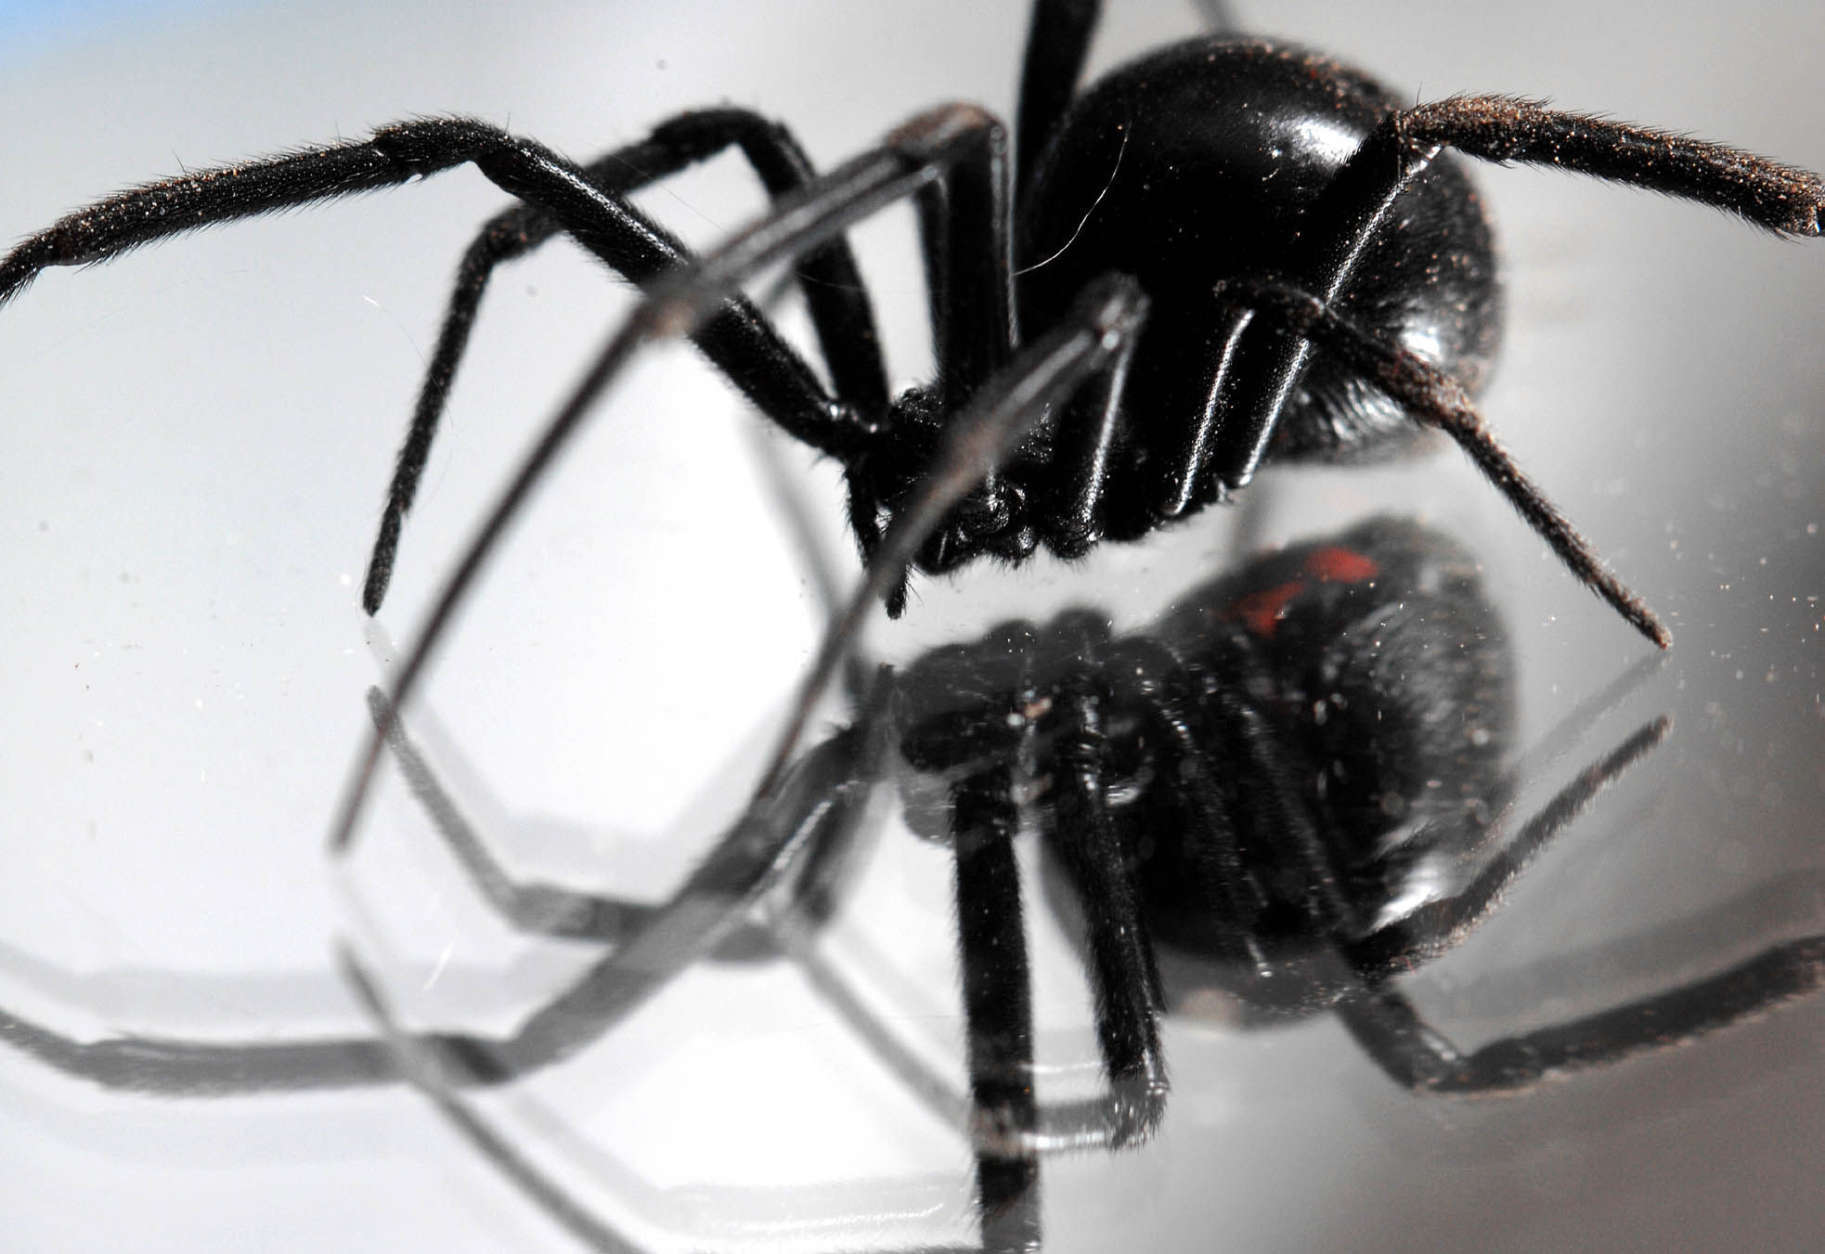 A black widow spider walks on a mirror in a garage at a home in Great Falls, Mont., on Monday, Nov. 5, 2007. (AP Photo/Great Falls Tribune, Robin Loznak)